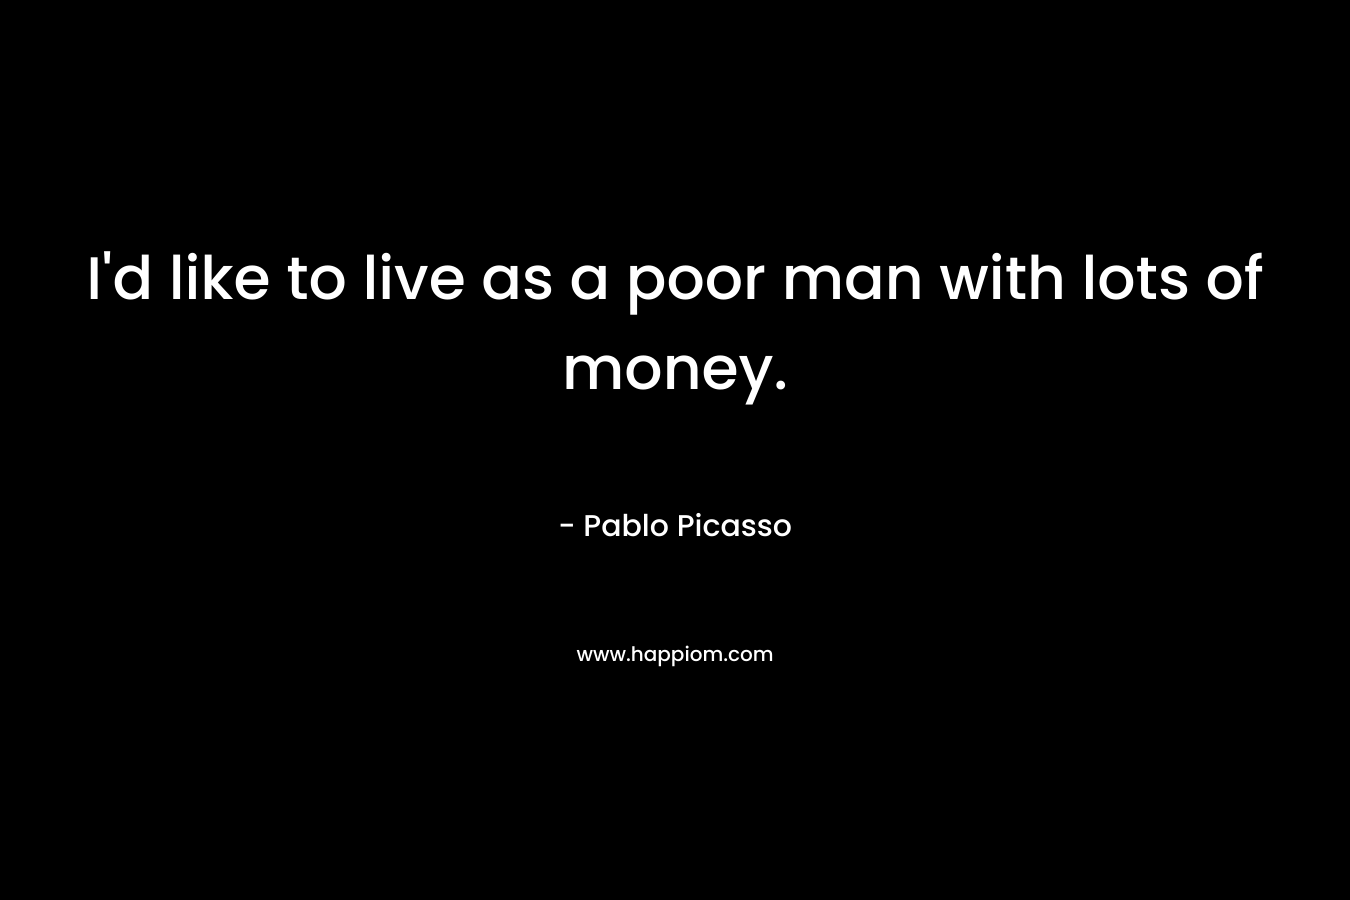 I'd like to live as a poor man with lots of money.